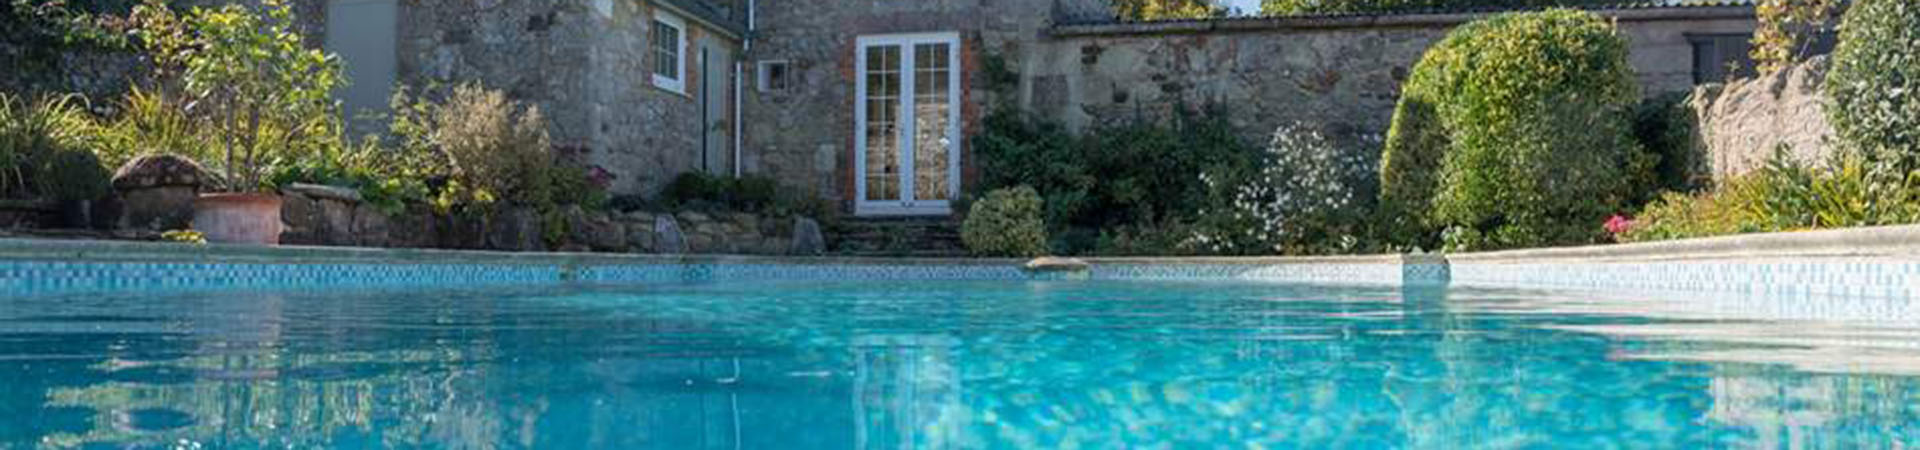 Holiday cottages with pools in Essex